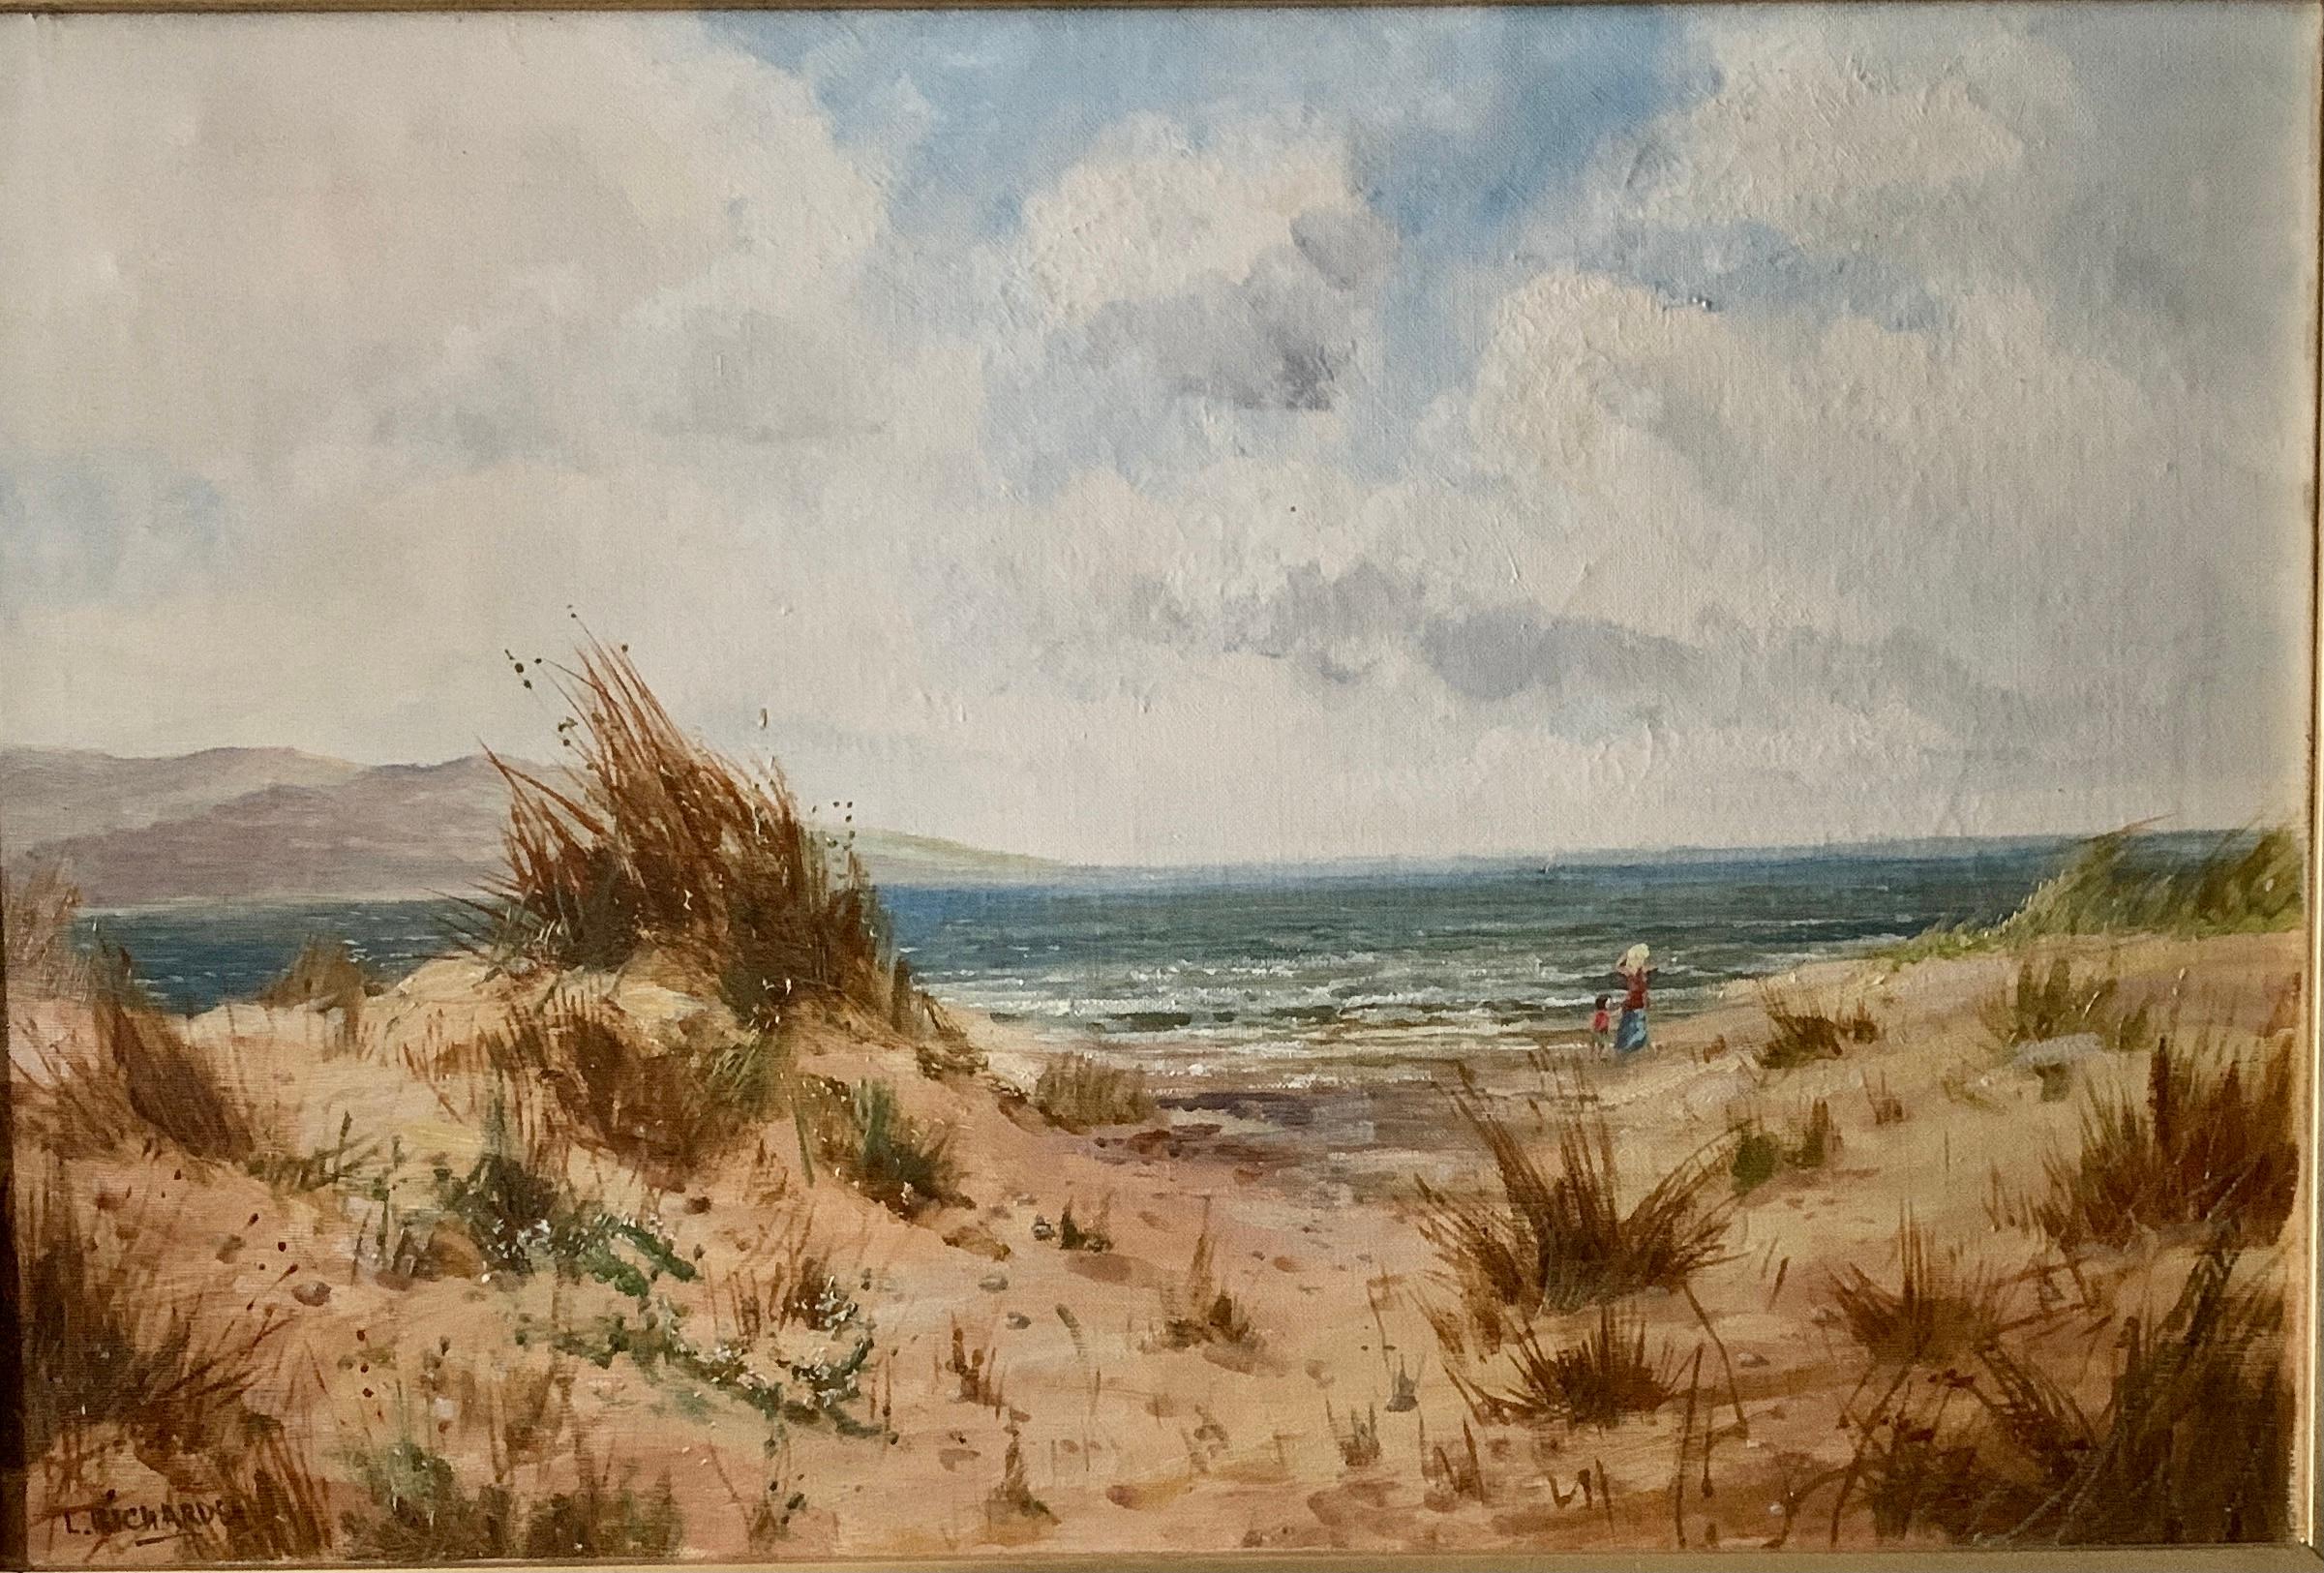 Antique oil on canvas, English beach scene, with sand dunes and people walking - Painting by Daniel Sherrin